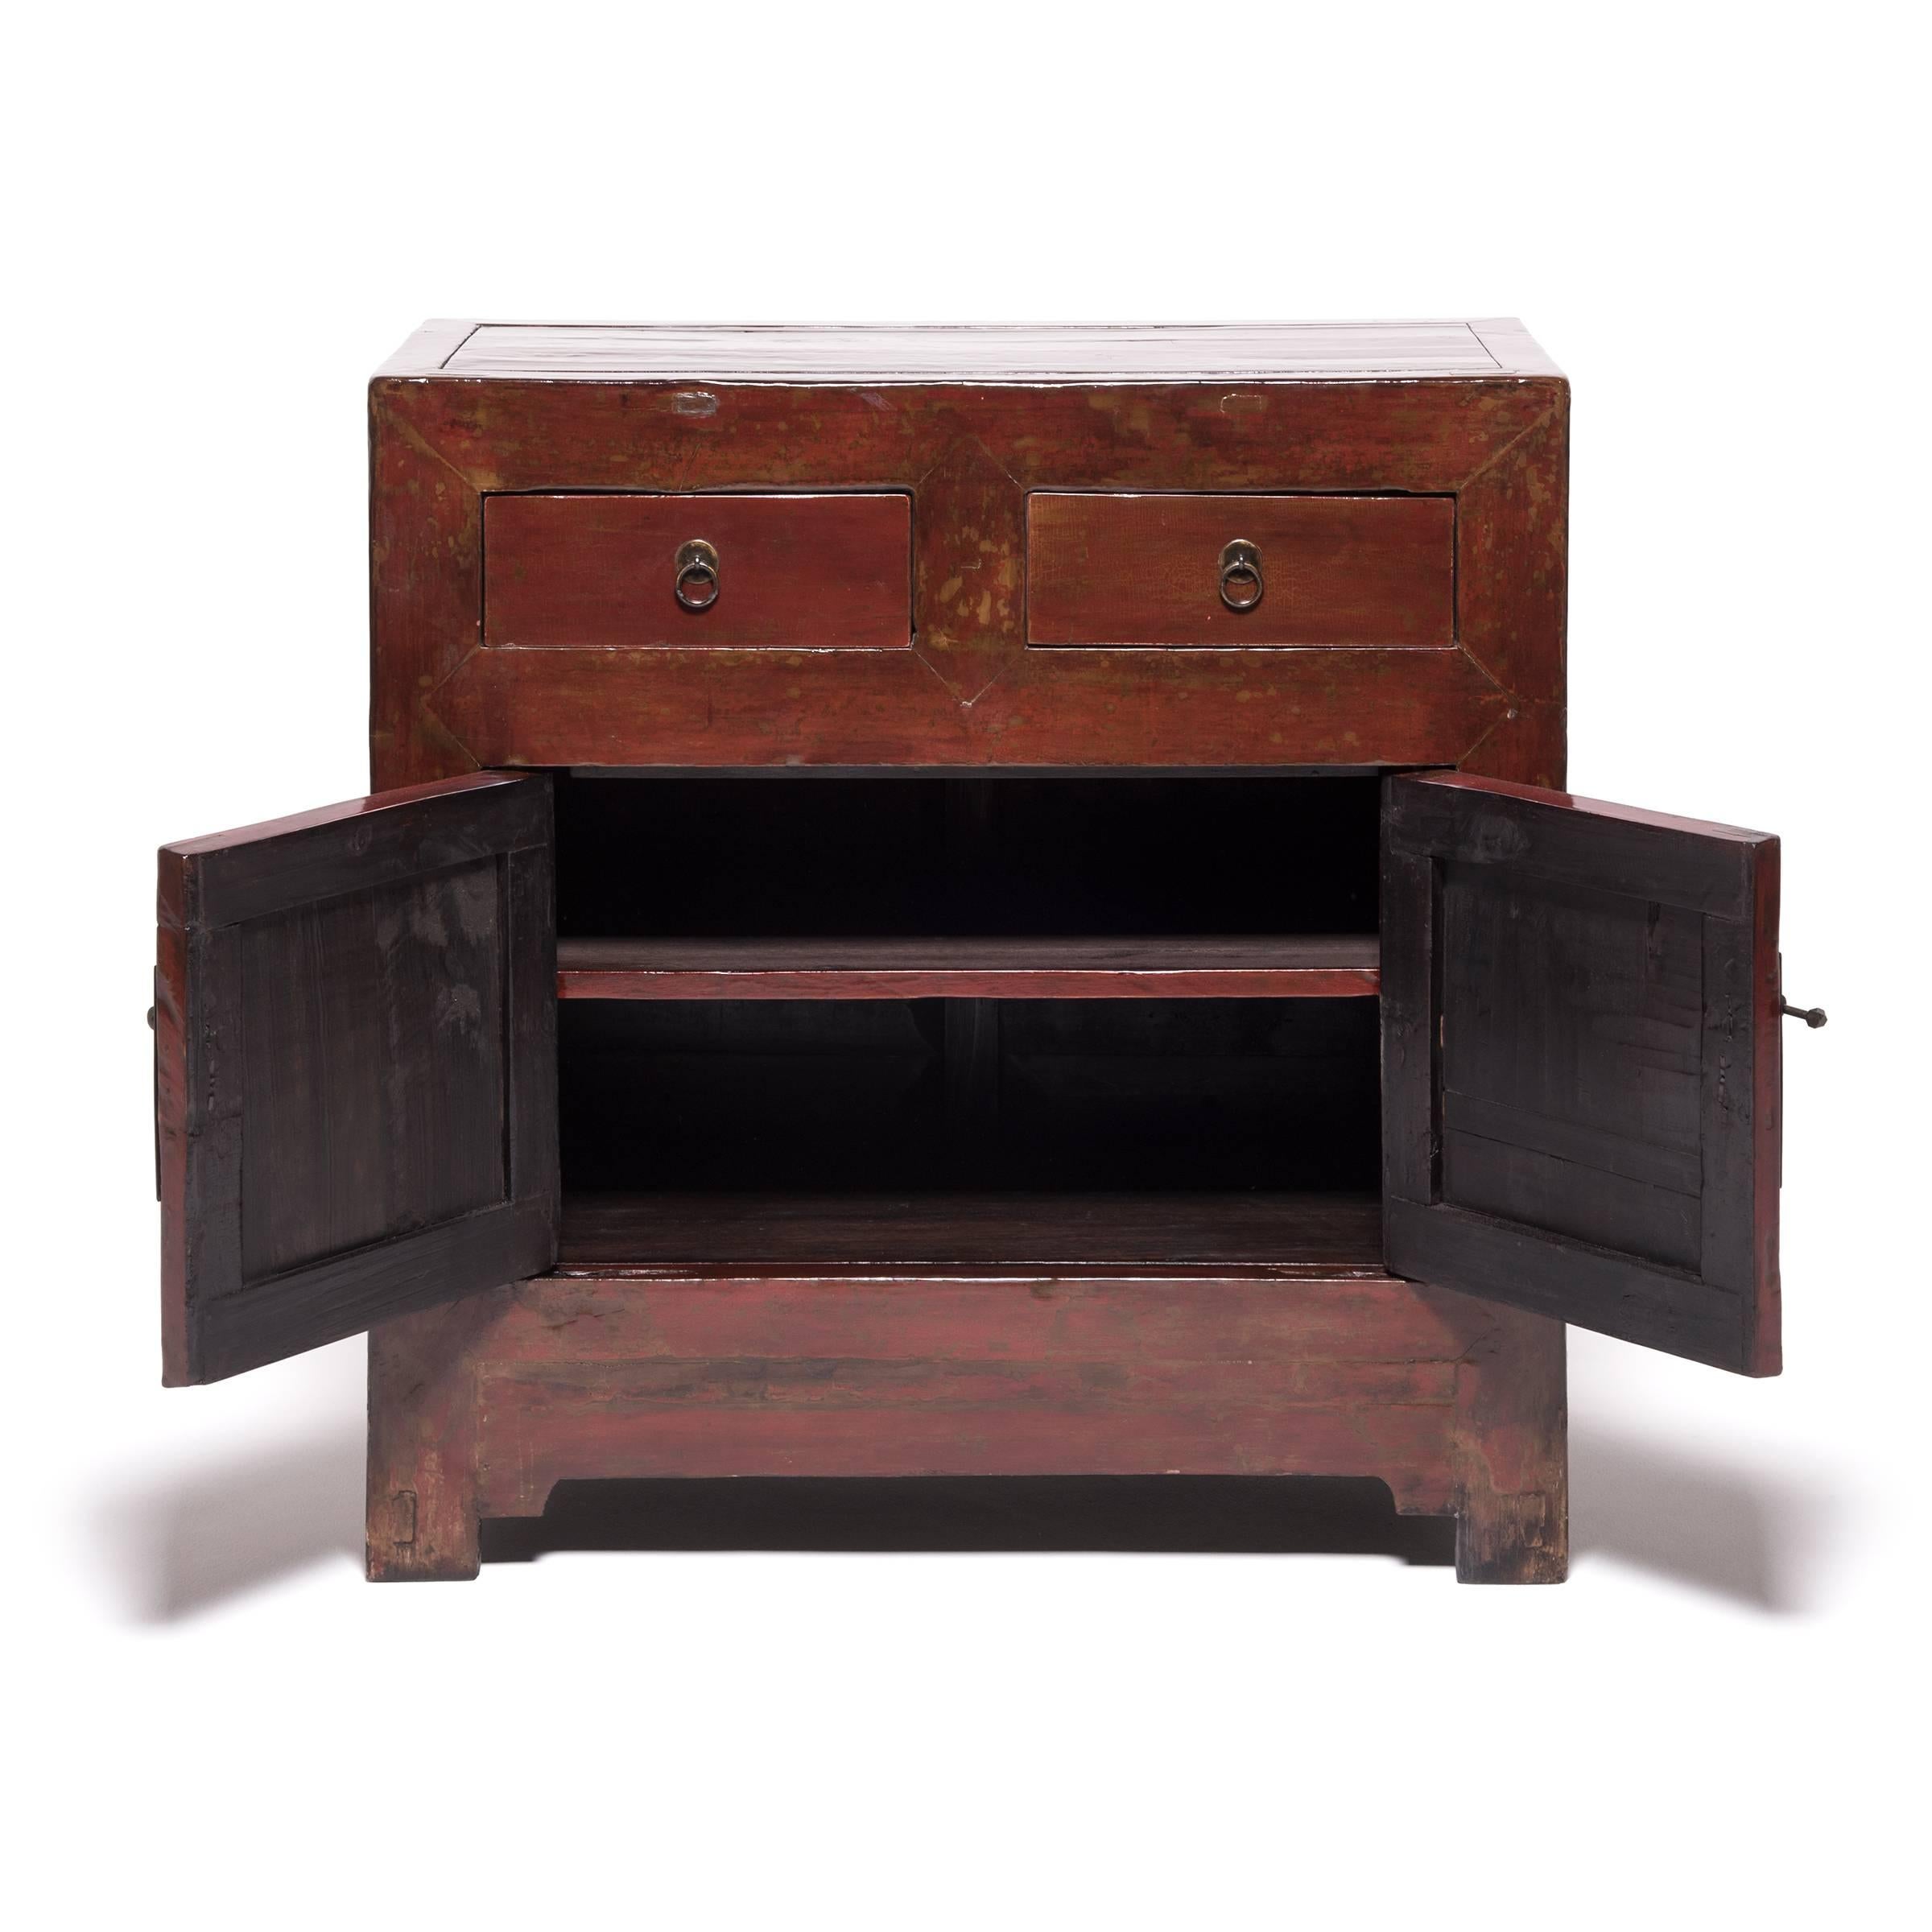 This 19th century chest hailing out of Northern China started its life as a storage trunk with a solid lacquered front. Artisans skilled in traditional Chinese carpentry reconfigured it into a two-door chest and applied additional coats of lacquer,